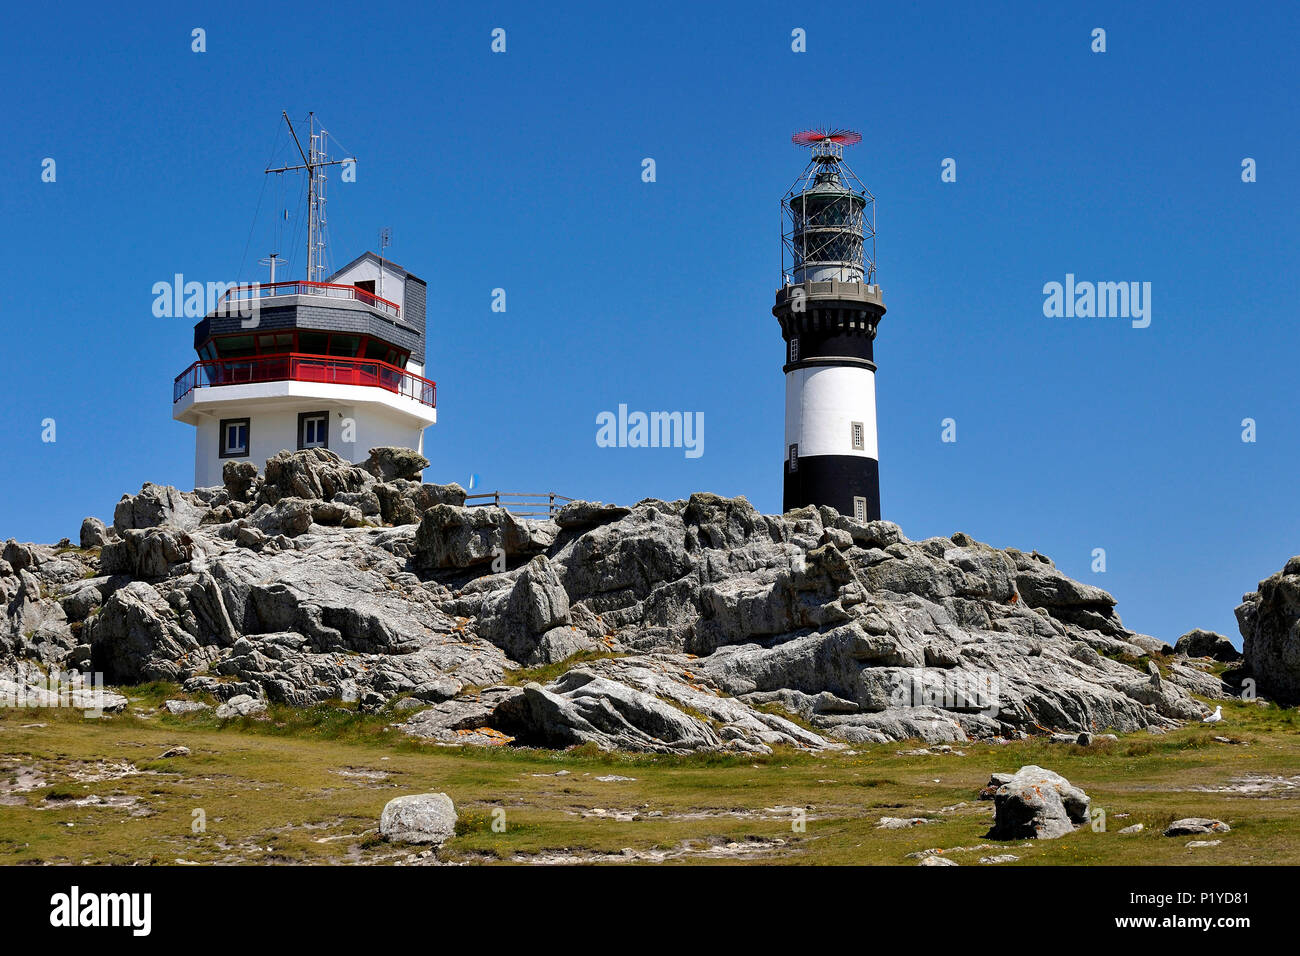 France, Brittany, Finistere, the Creach lighthouse and Semaphore on the Ouessant Island Stock Photo